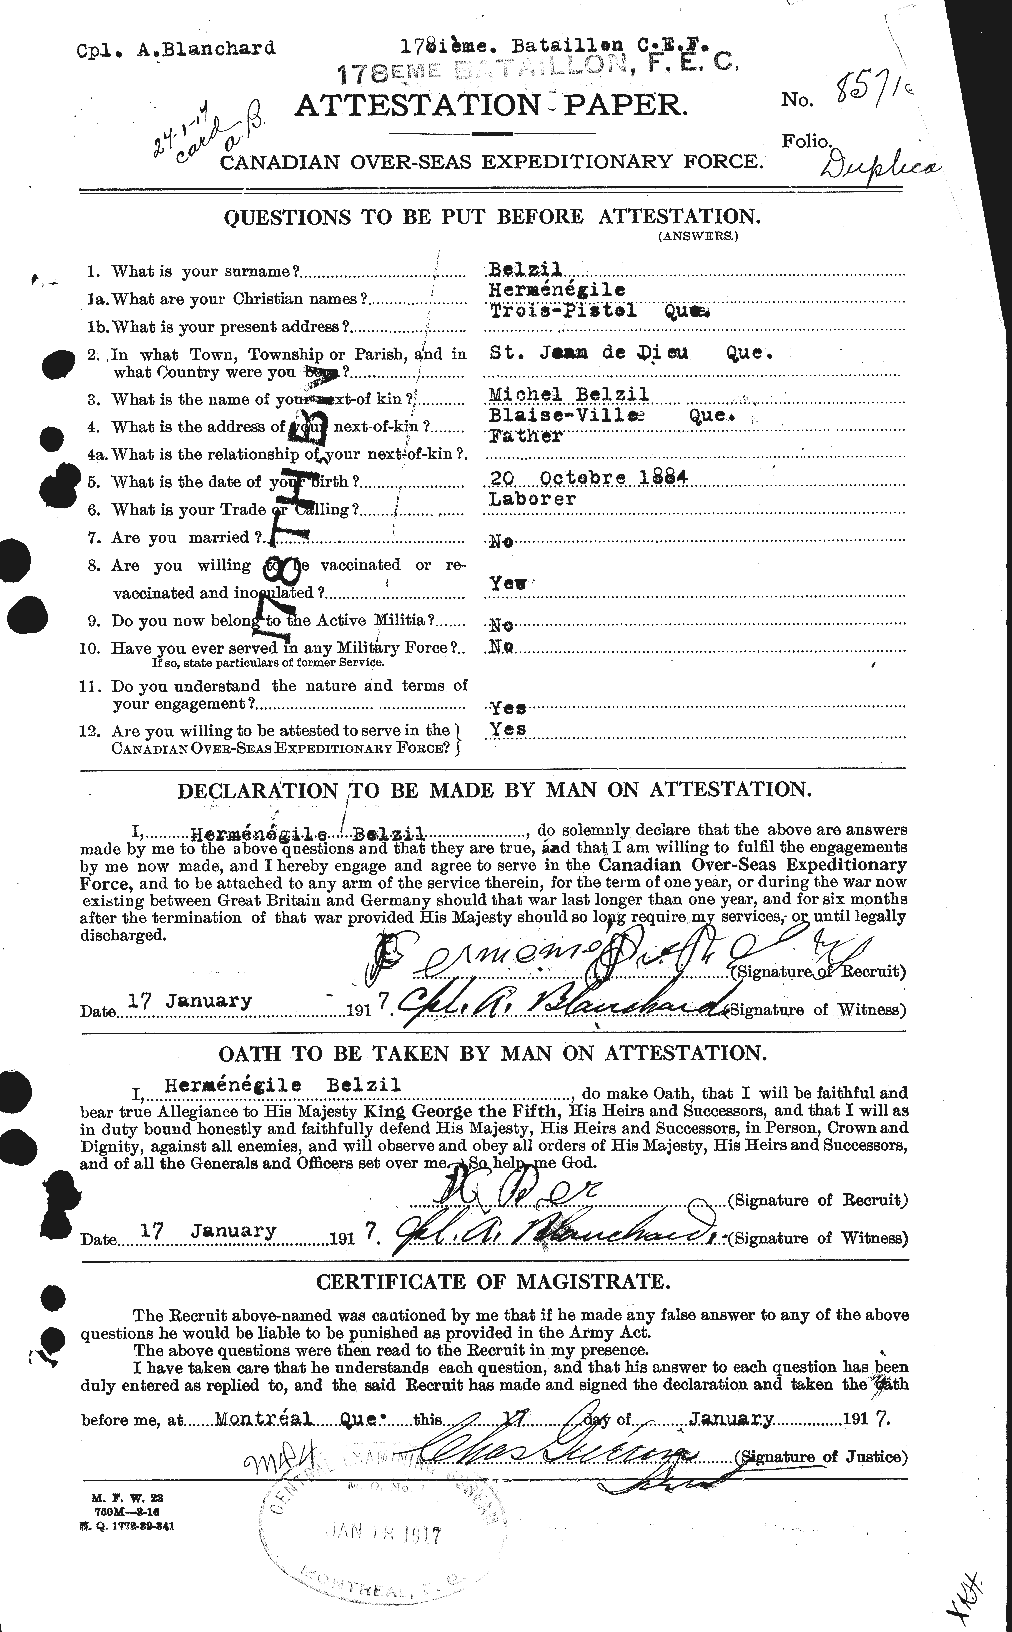 Personnel Records of the First World War - CEF 233727a